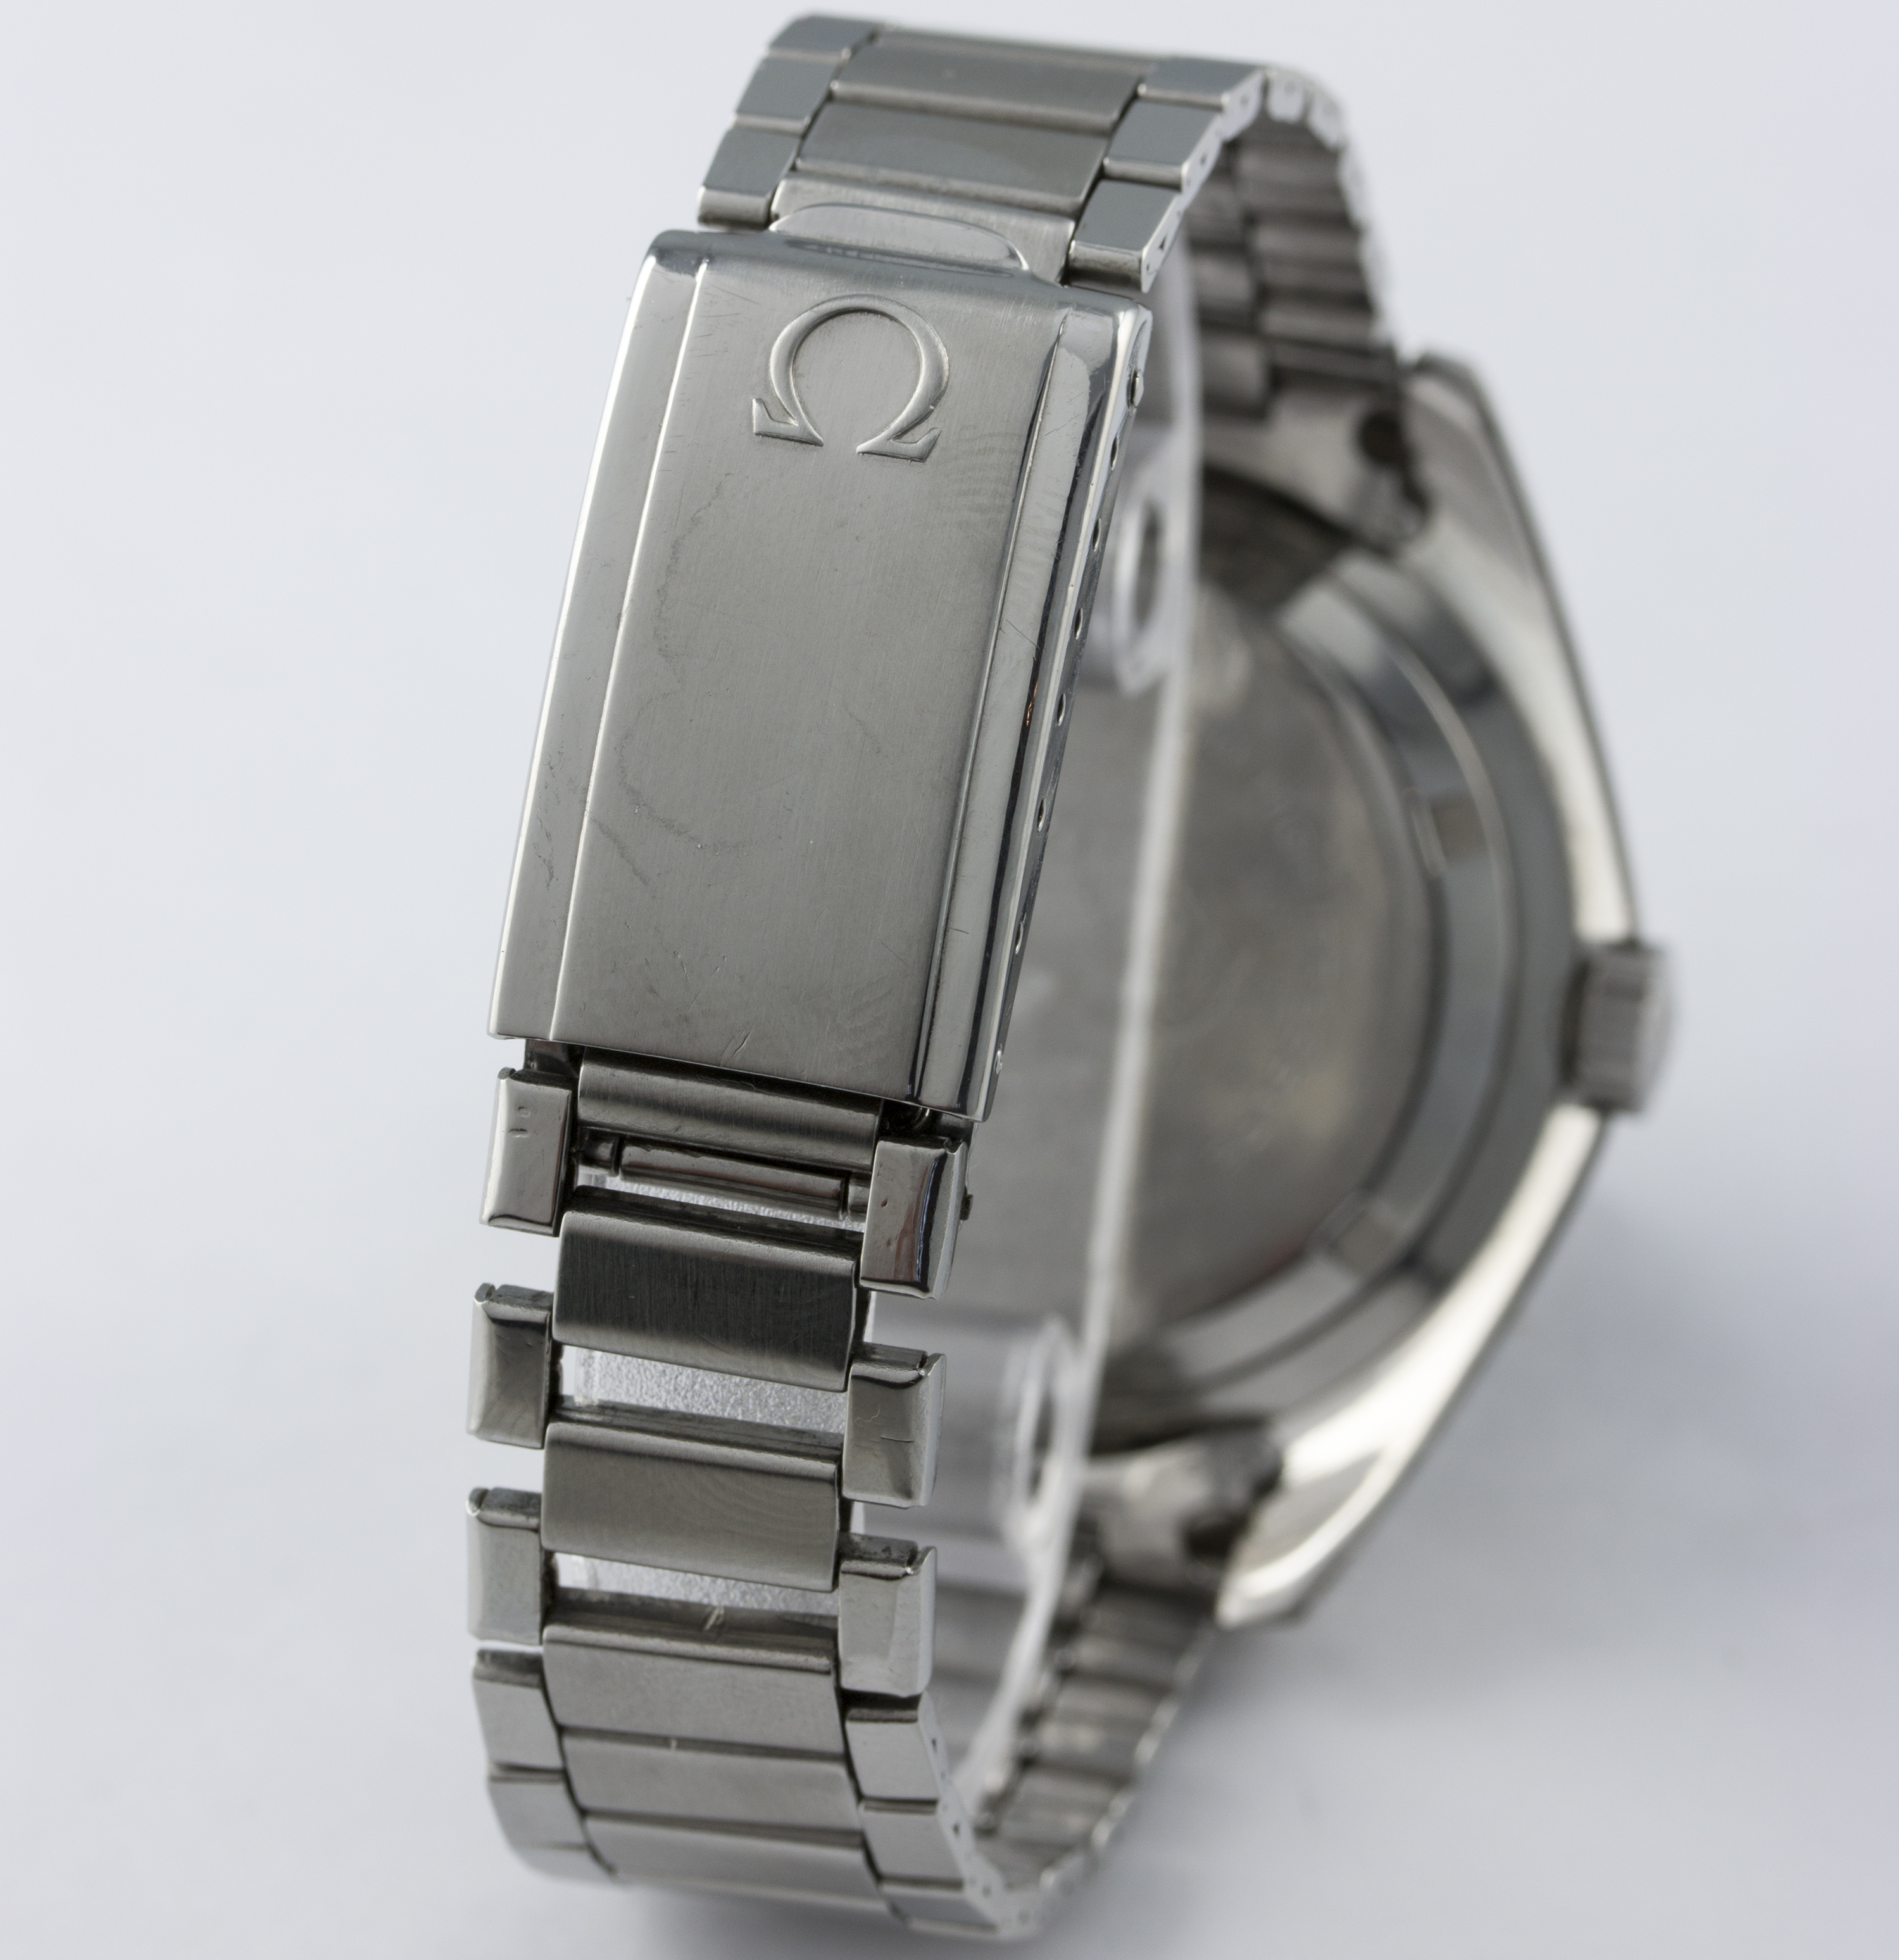 A RARE GENTLEMAN'S STAINLESS STEEL OMEGA SEAMASTER 300 BRACELET WATCH CIRCA 1967, REF. 165.024 D: - Image 7 of 10